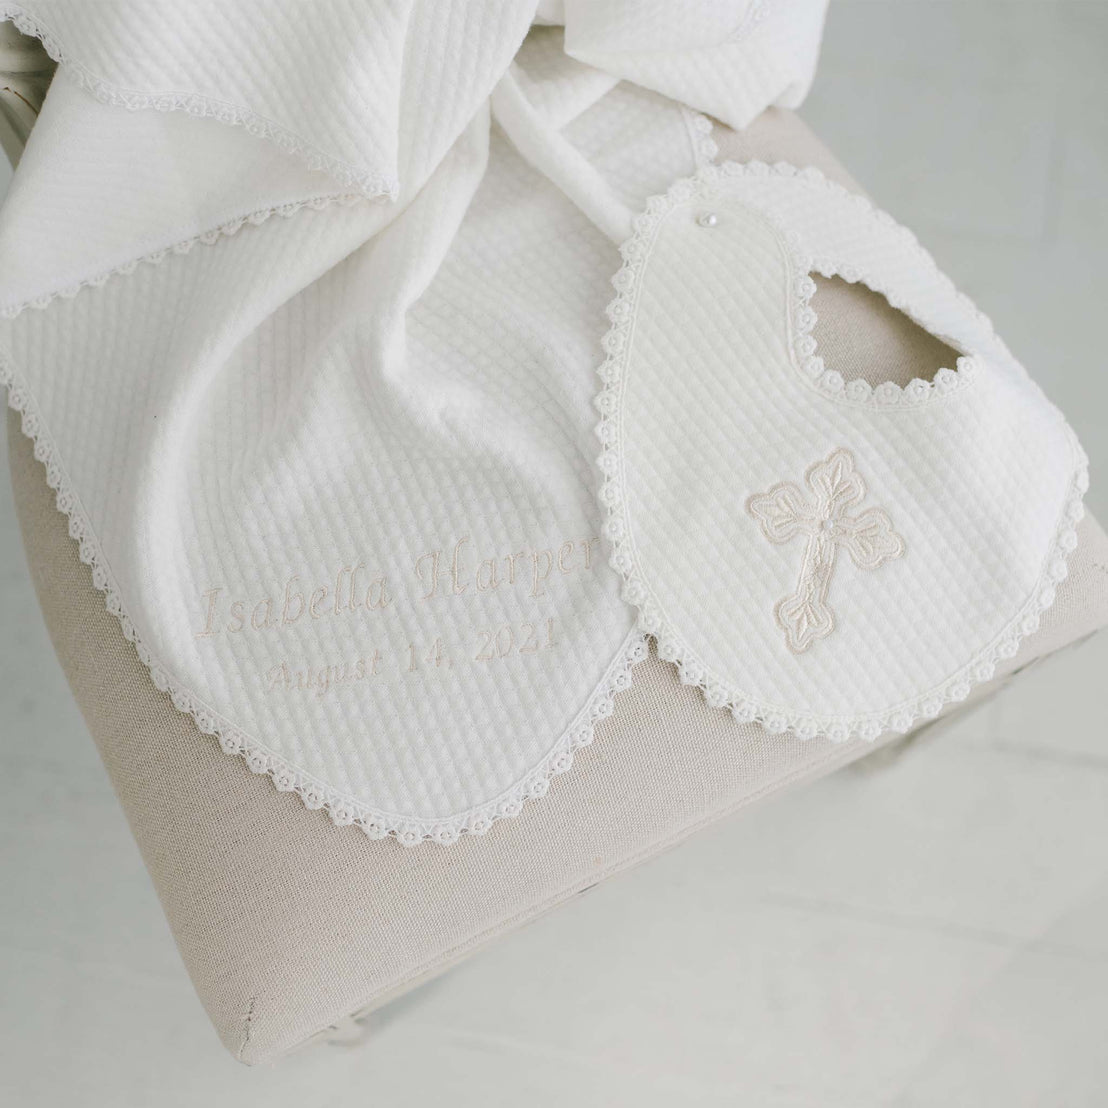 A personalized Baby Girl Blessing Gift Set by Baby Beau & Belle featuring a white bib and towel set with embroidered details and lace trim, showcasing the name "Isabella Harper" and the date "August 14, 2023".